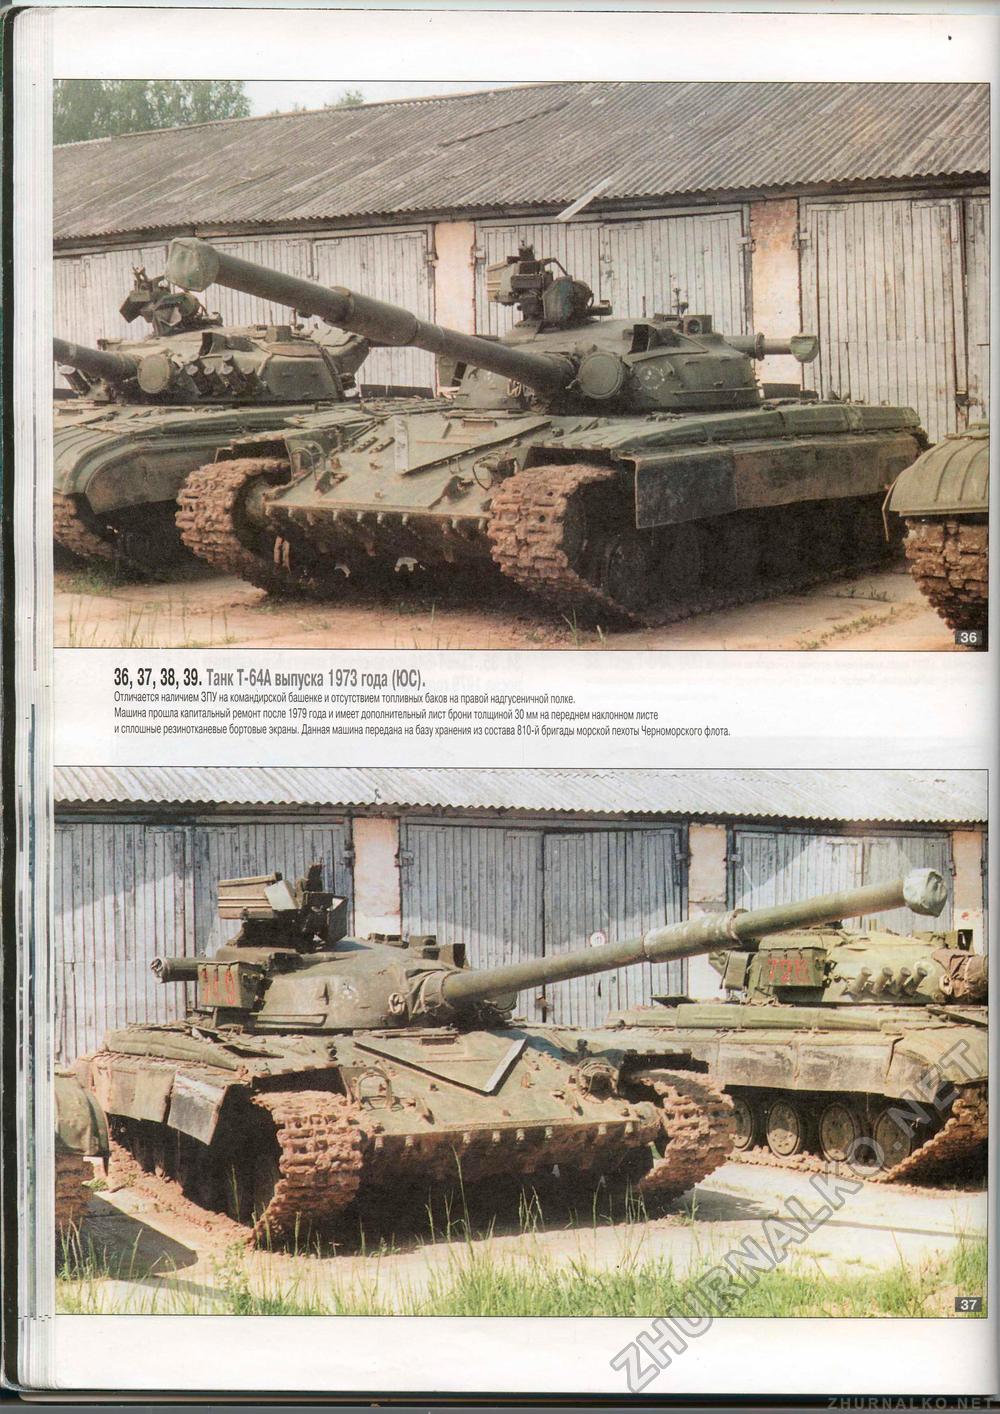  Special - T-64,  23